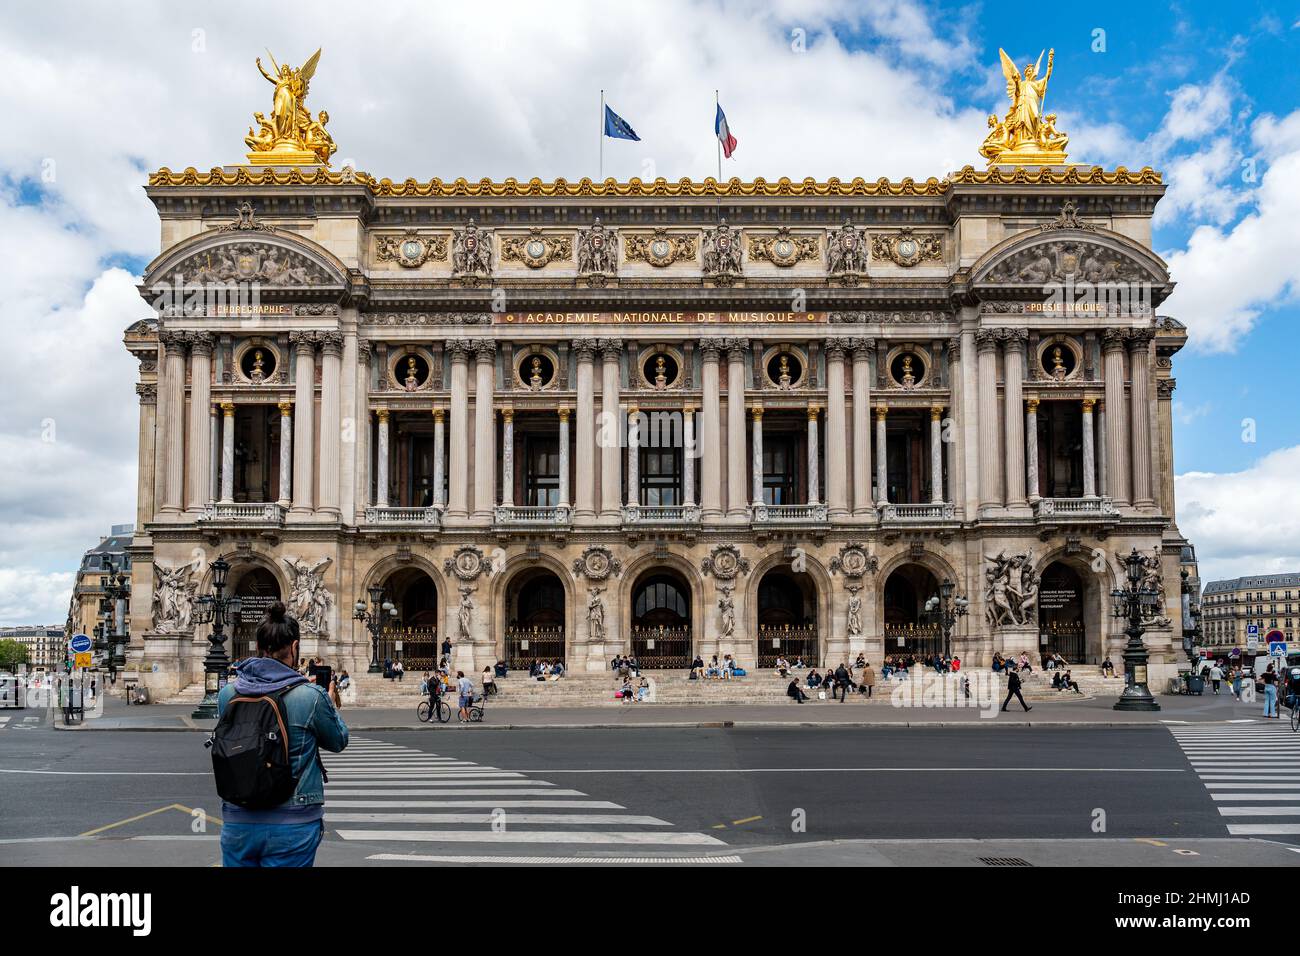 Parisians relaxing on the steps of the Opera Garnier house - Paris, France Stock Photo